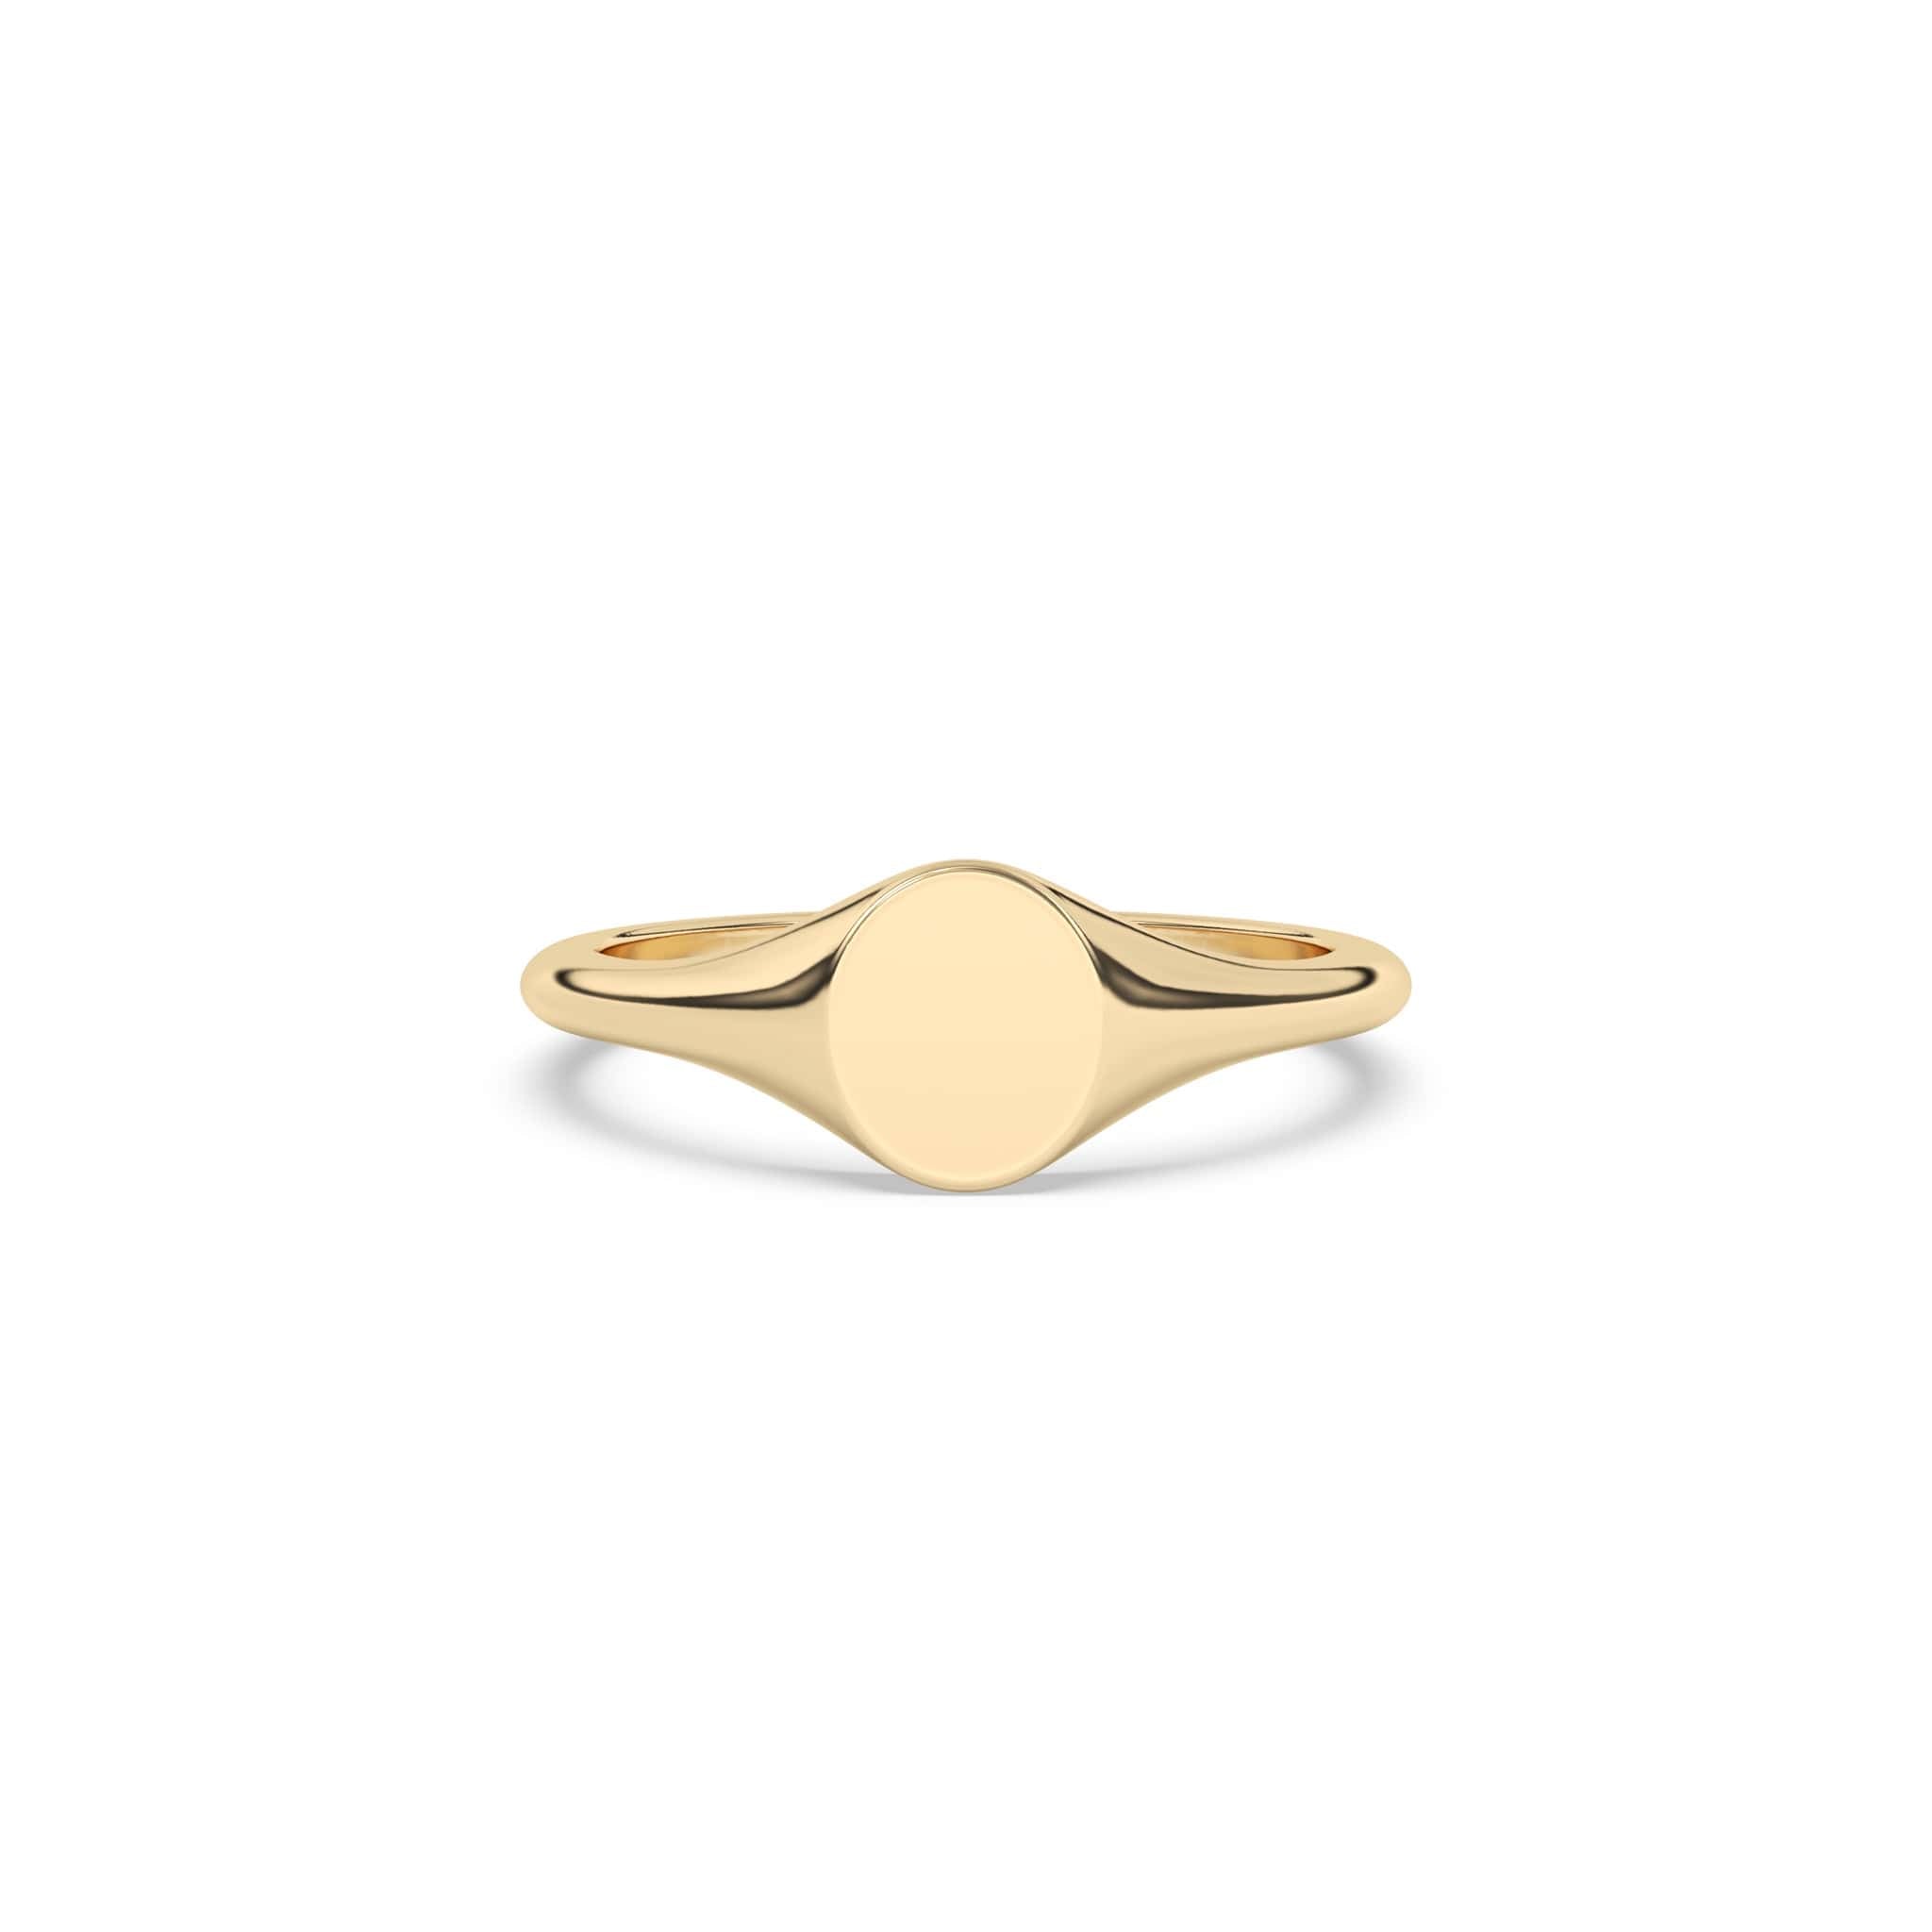 Solid Gold Petite Oval Signet Ring – Argent & Asher